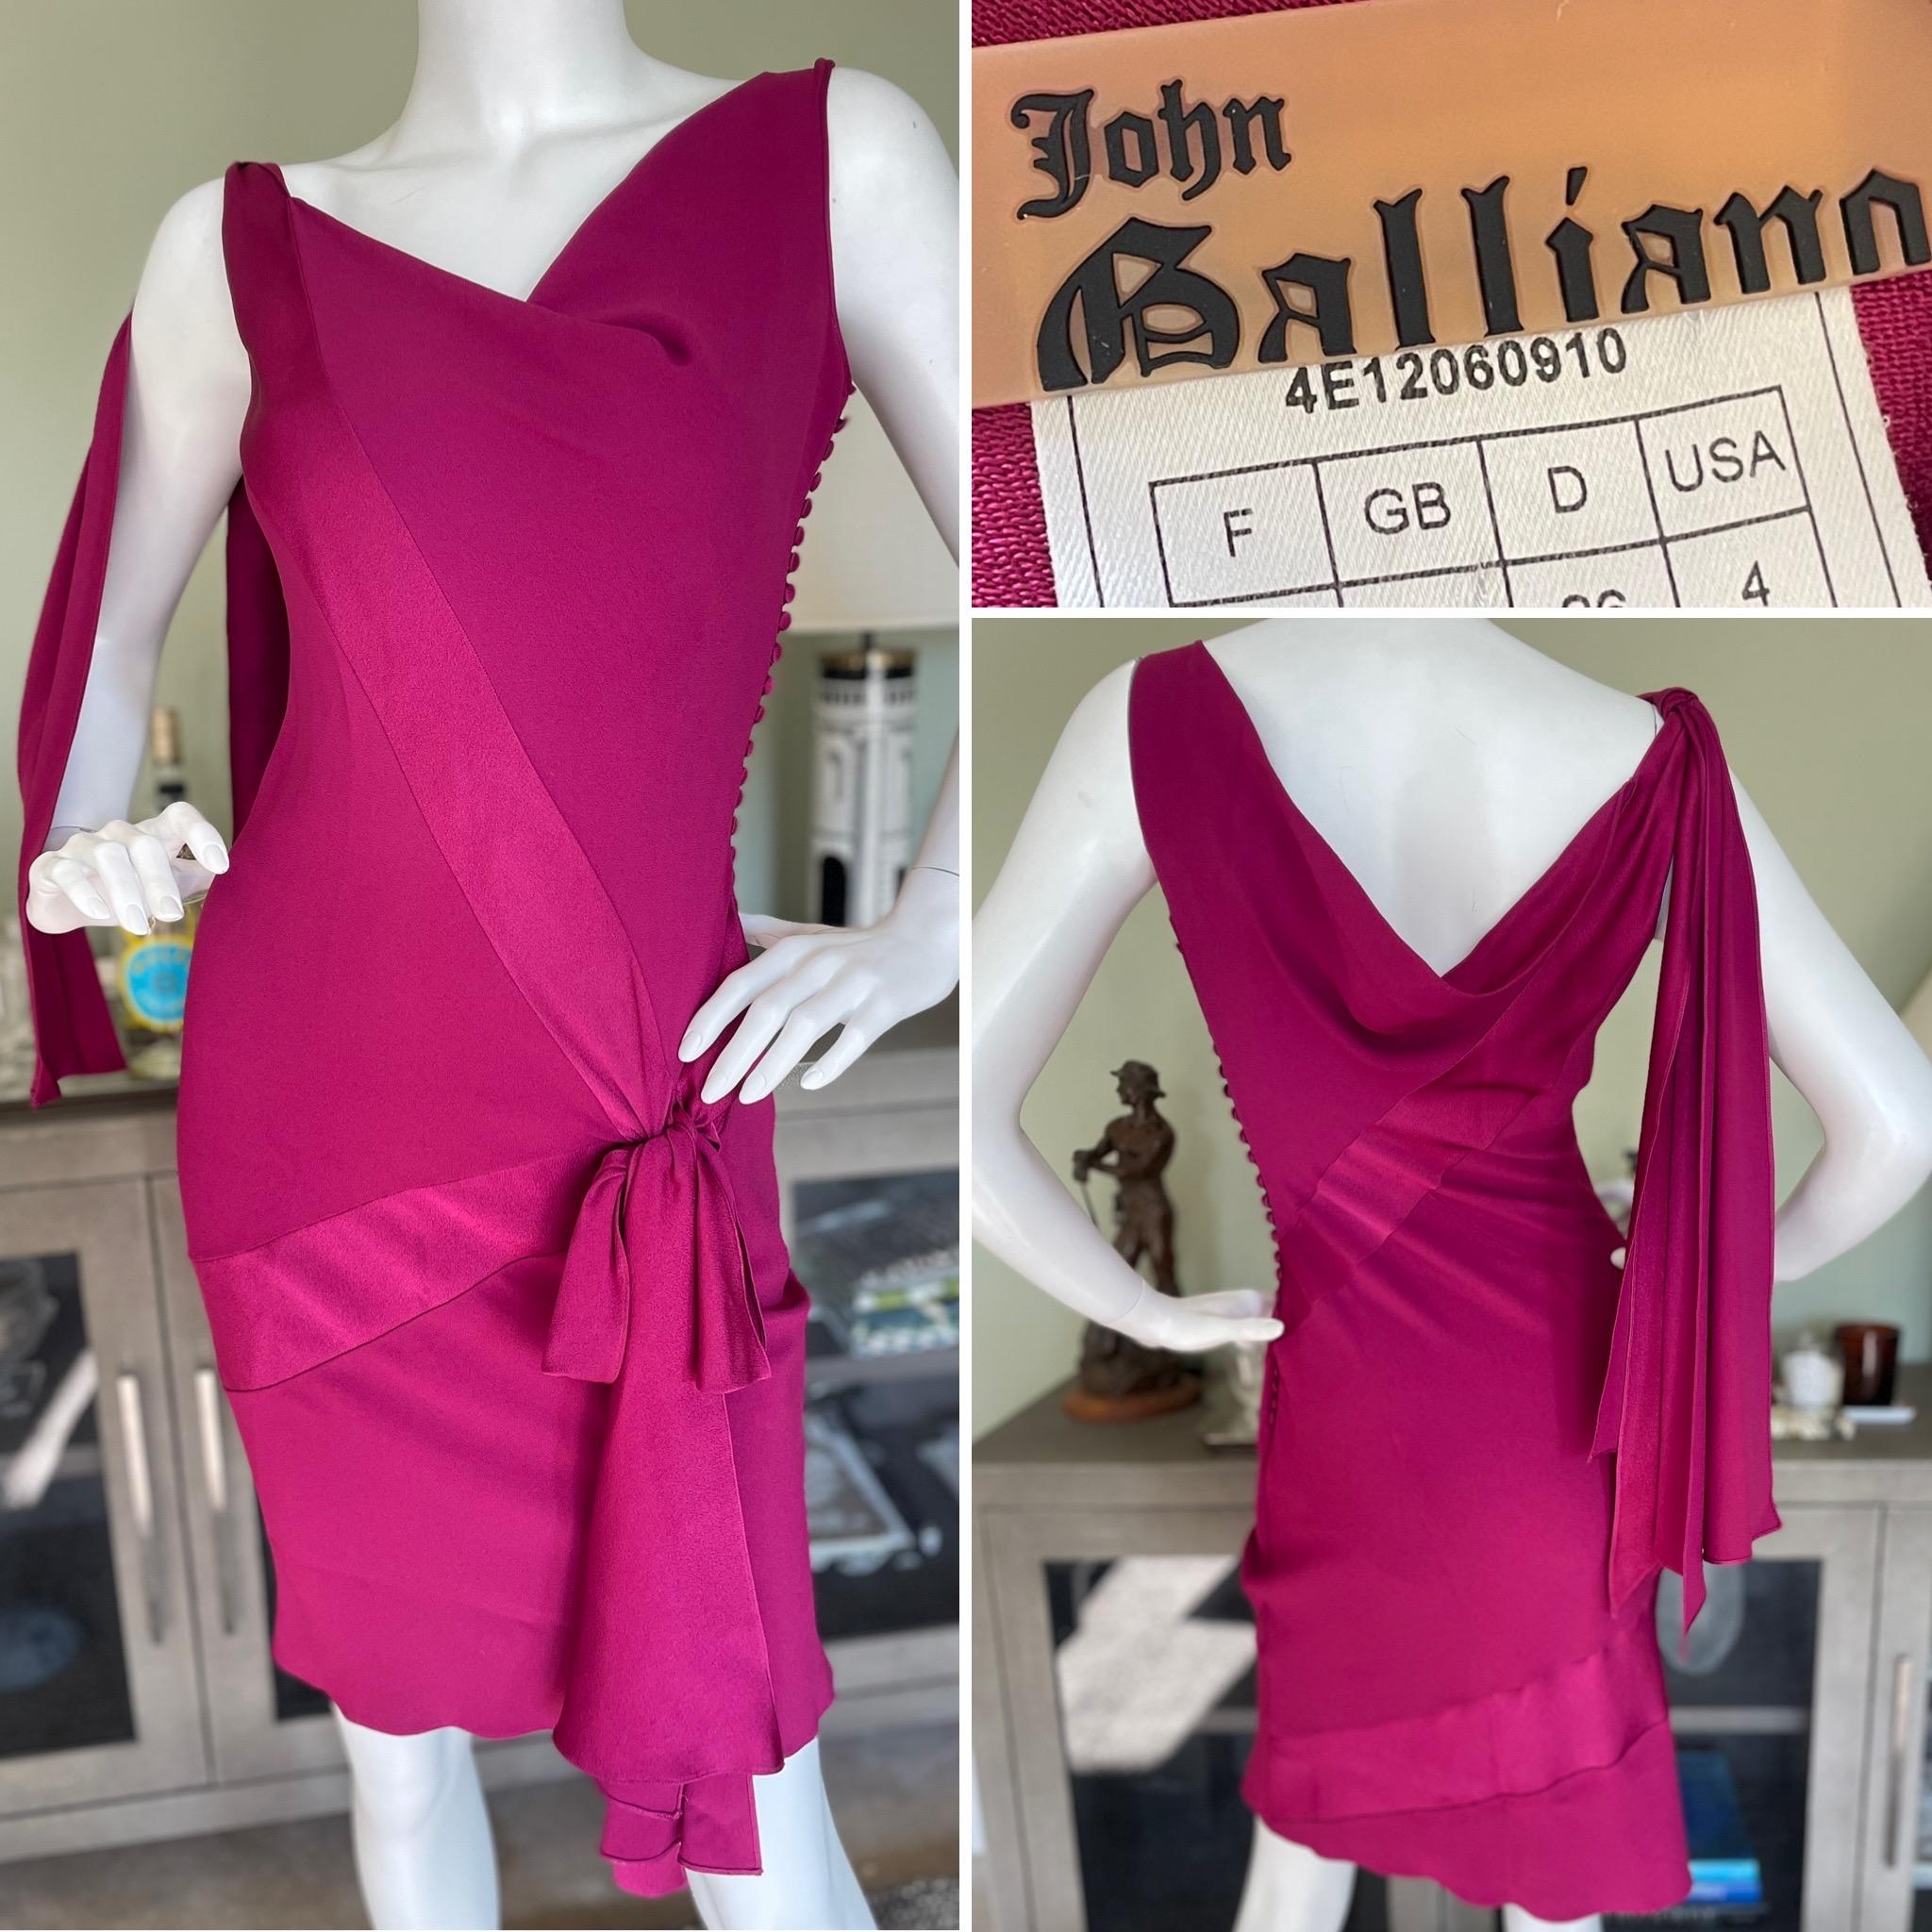  John Galliano 2004 Raspberry Bias Cut Cocktail Dress.
Utilizing both the front and back of the fabric to create a matte / shiny pattern, a technique Galliano uses to great effect throughout his career.
So pretty, please use the zoom feature to see